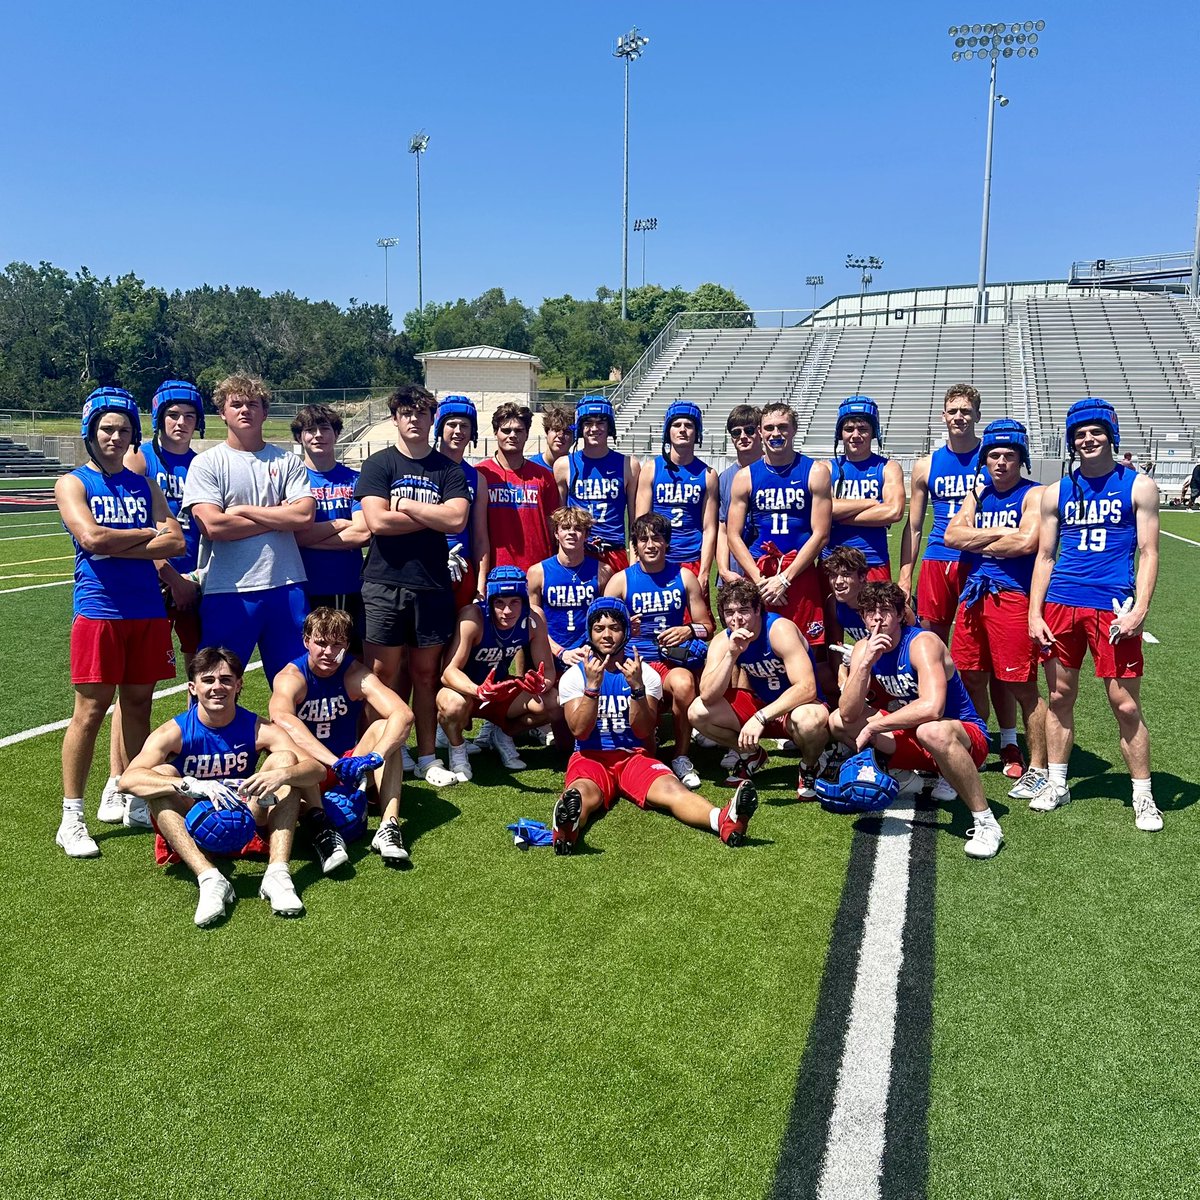 Westlake’s 7v7 team ran the table at the Lake Travis SQT to qualify for the State 7v7 Tournament. The Chaps took down Dripping Springs to win the tournament and lock in their spot at state. #GoChaps